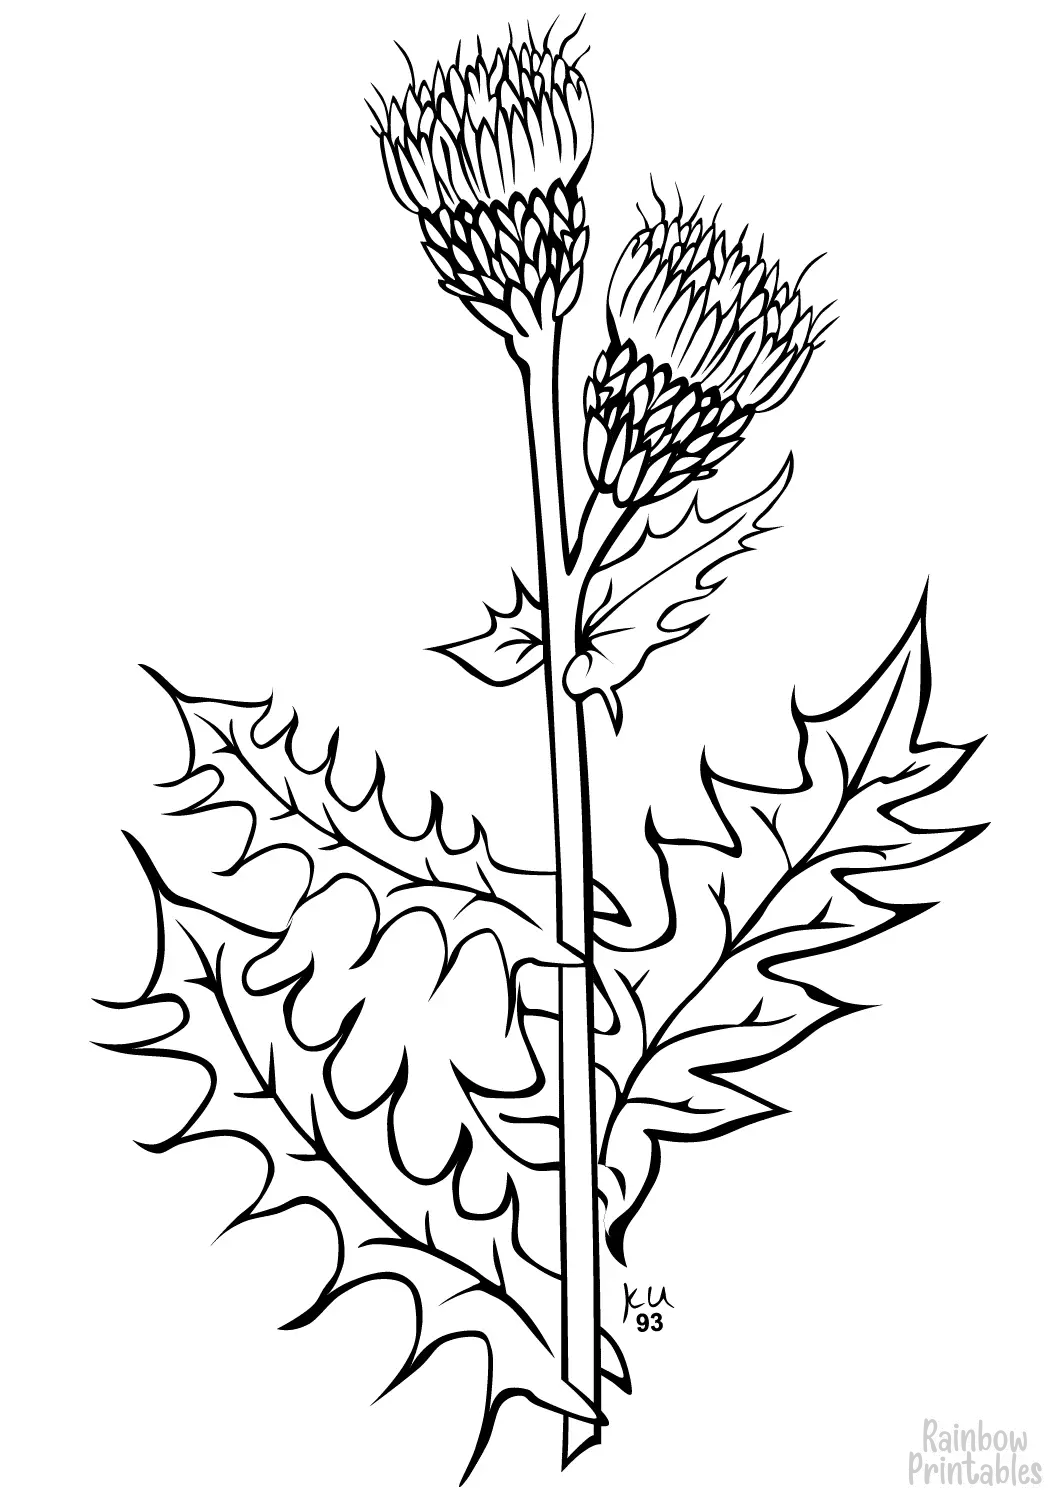 SIMPLE-EASY-line-drawings-CREEPING-THISTLE-coloring-page-for-kids Outline